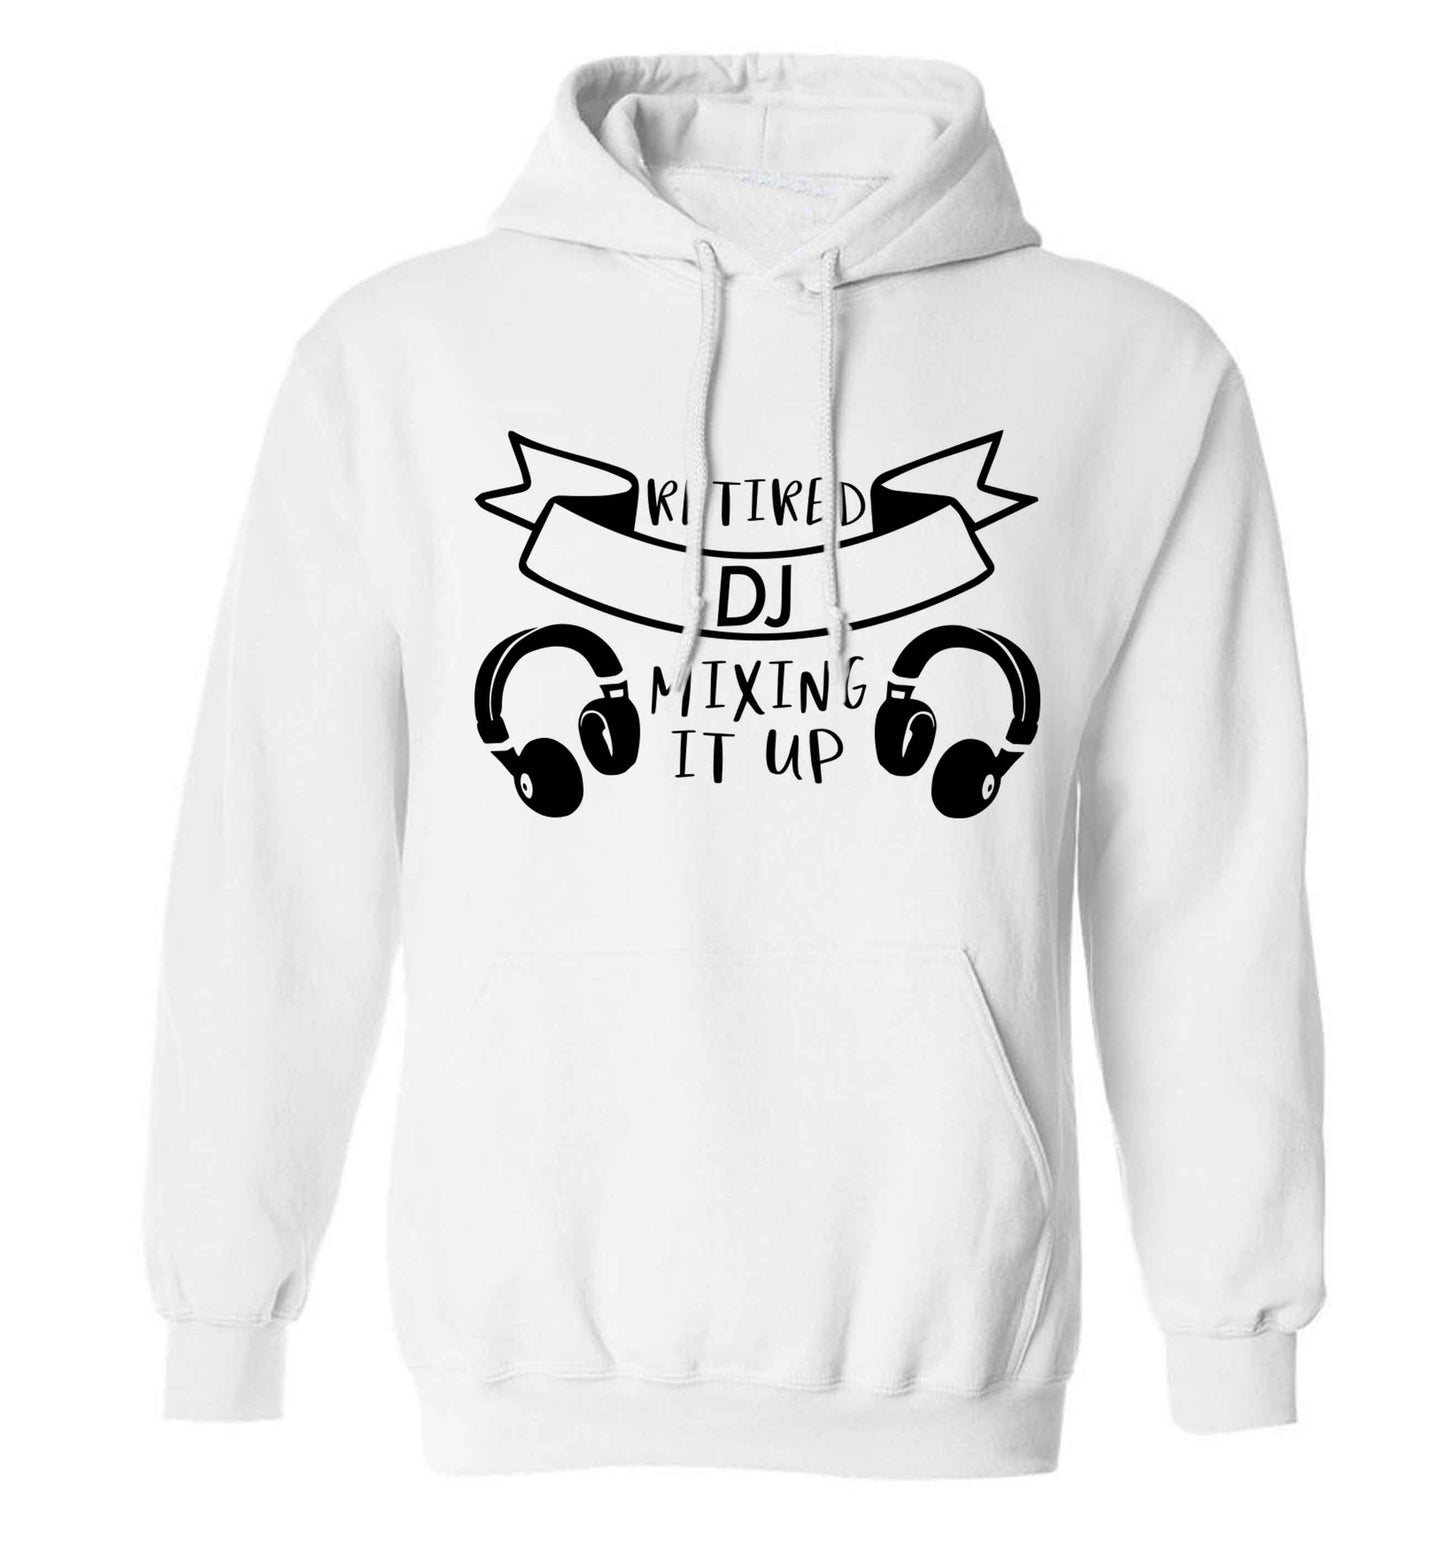 Retired DJ mixing it up adults unisex white hoodie 2XL